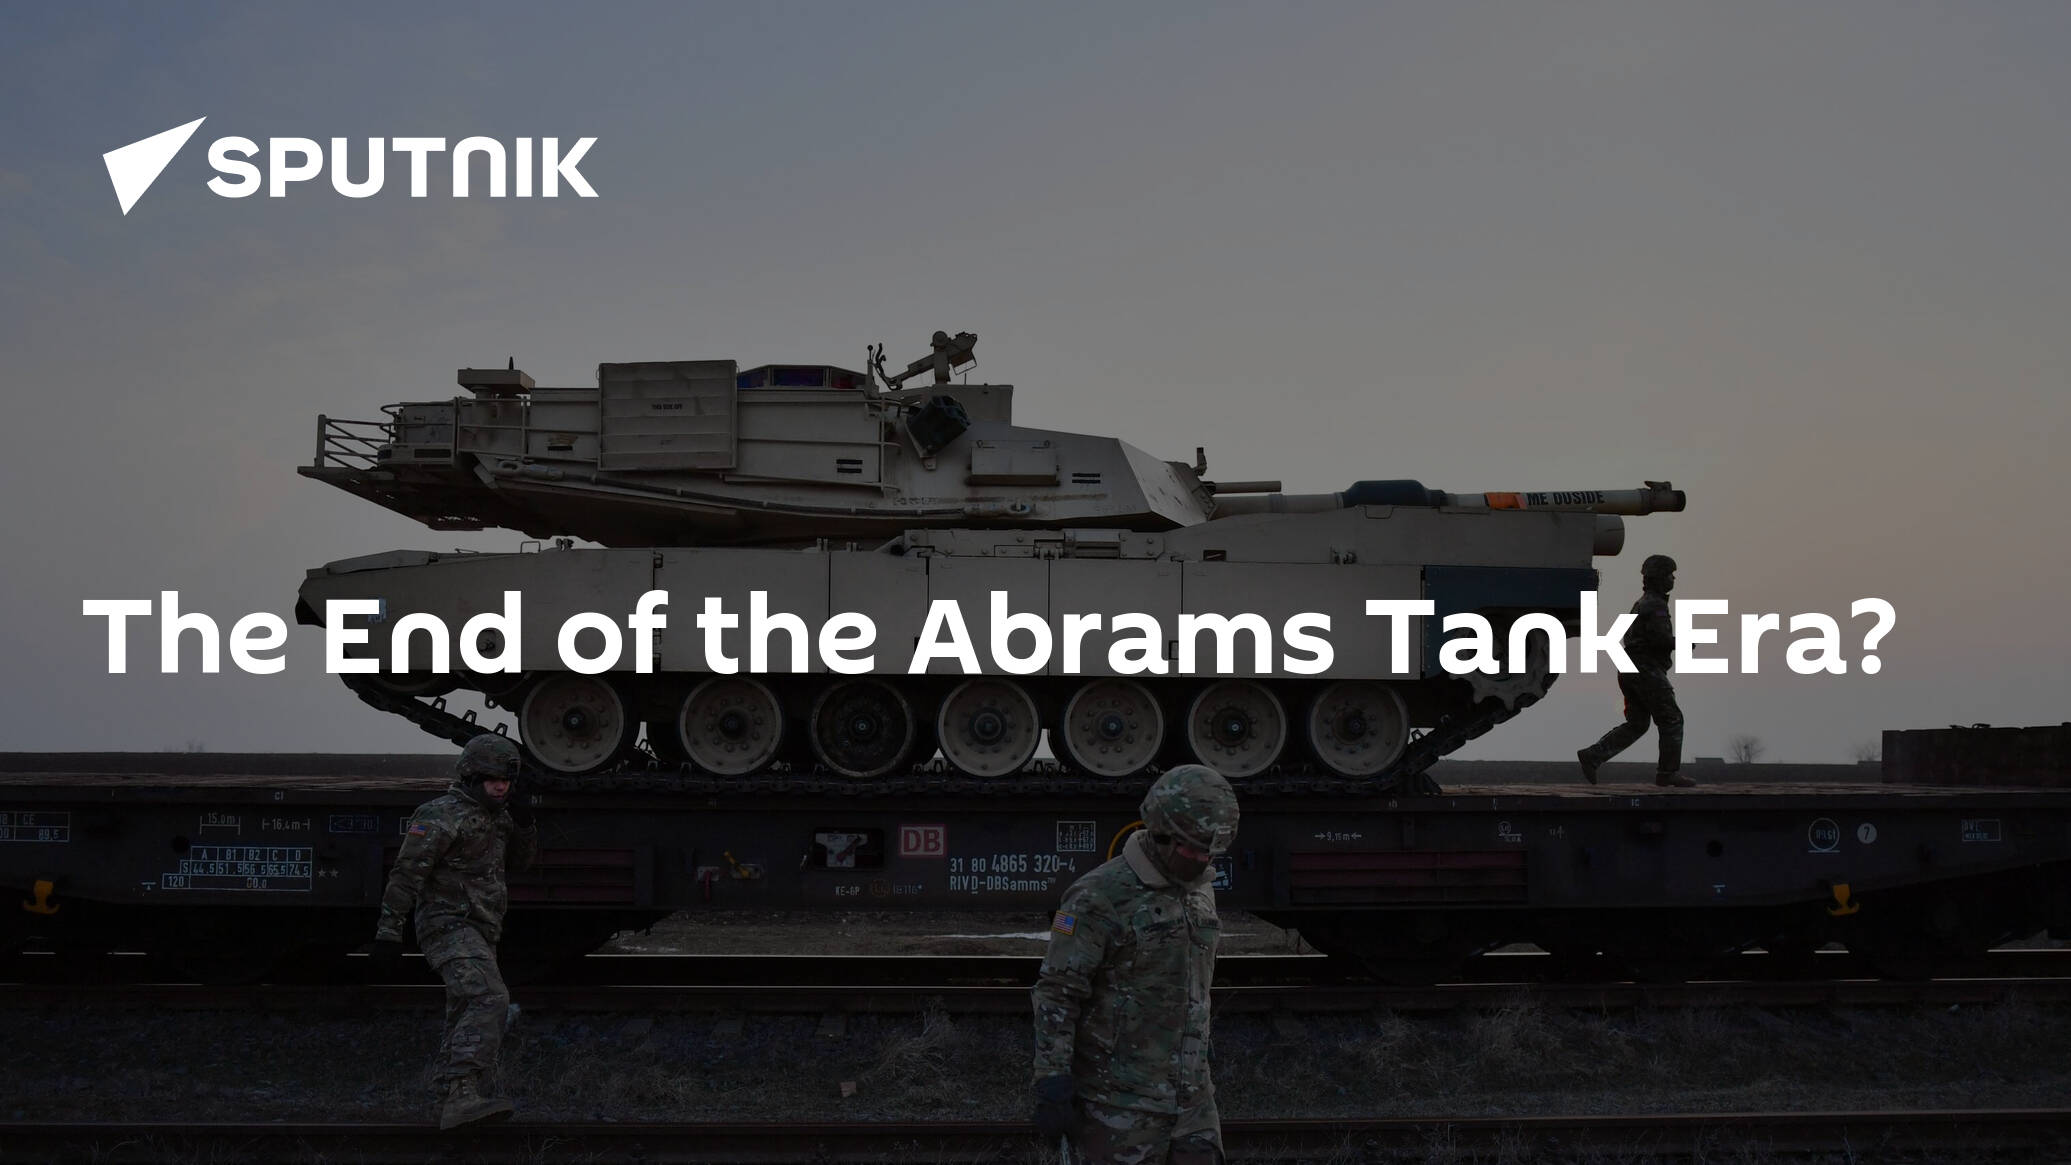 The End of the Abrams Tank Era?